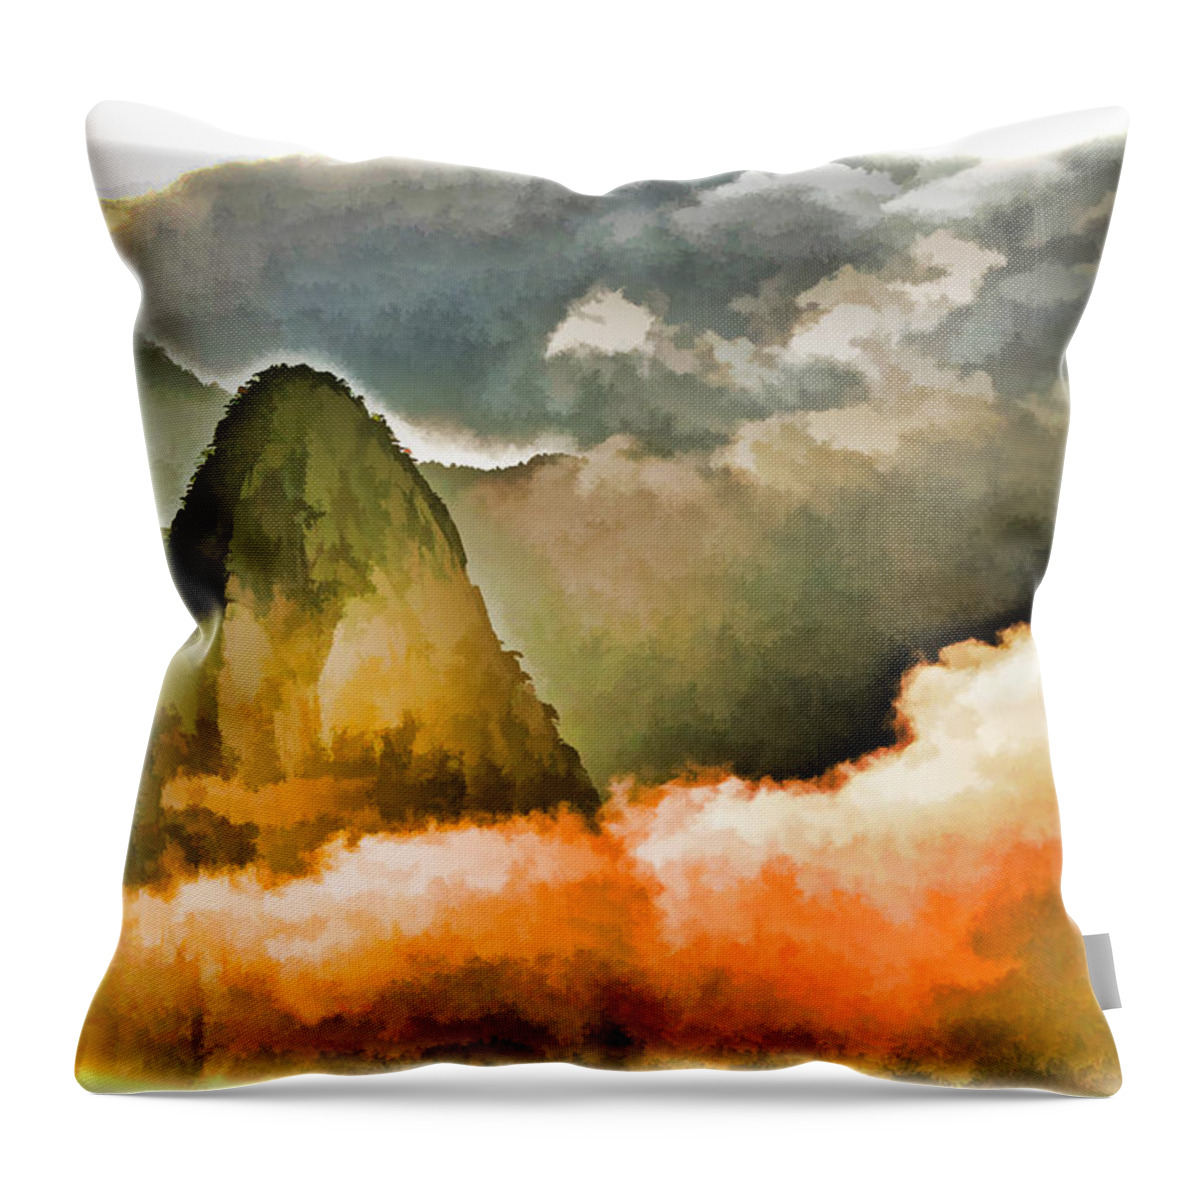 China Throw Pillow featuring the photograph Yellow Mountain Mists by Dennis Cox